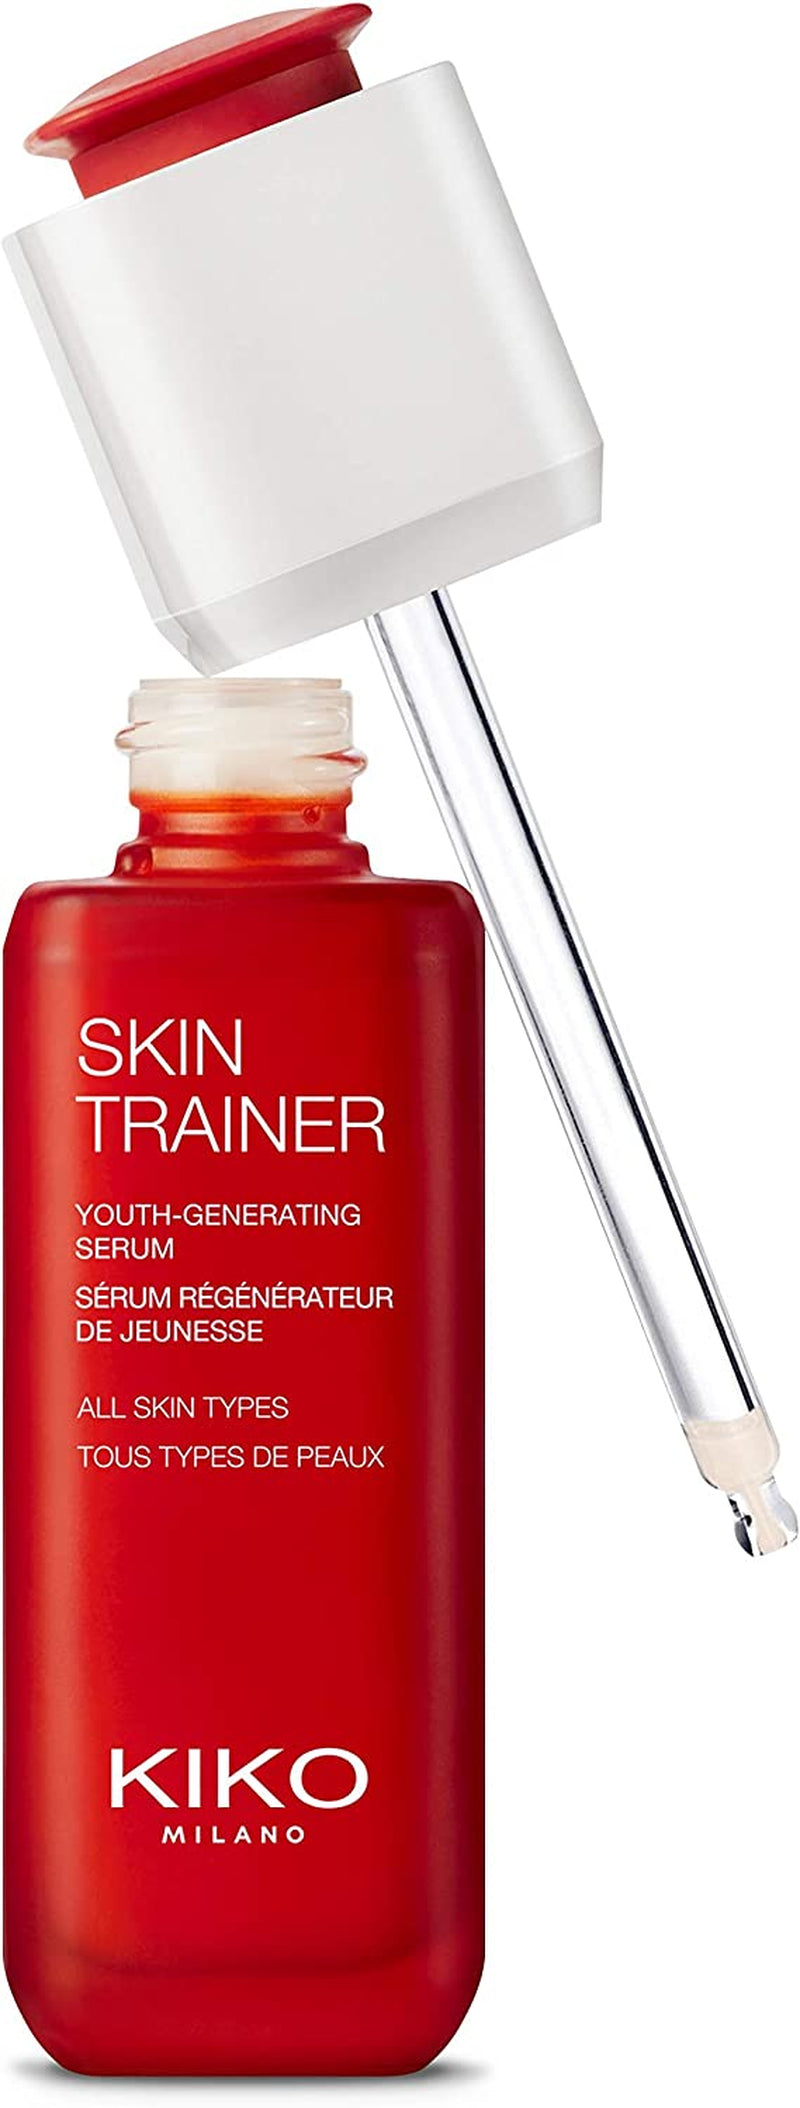 KIKO Milano Skin Trainer | a Serum for Youthful-Looking, Revitalized Skin at Any Age